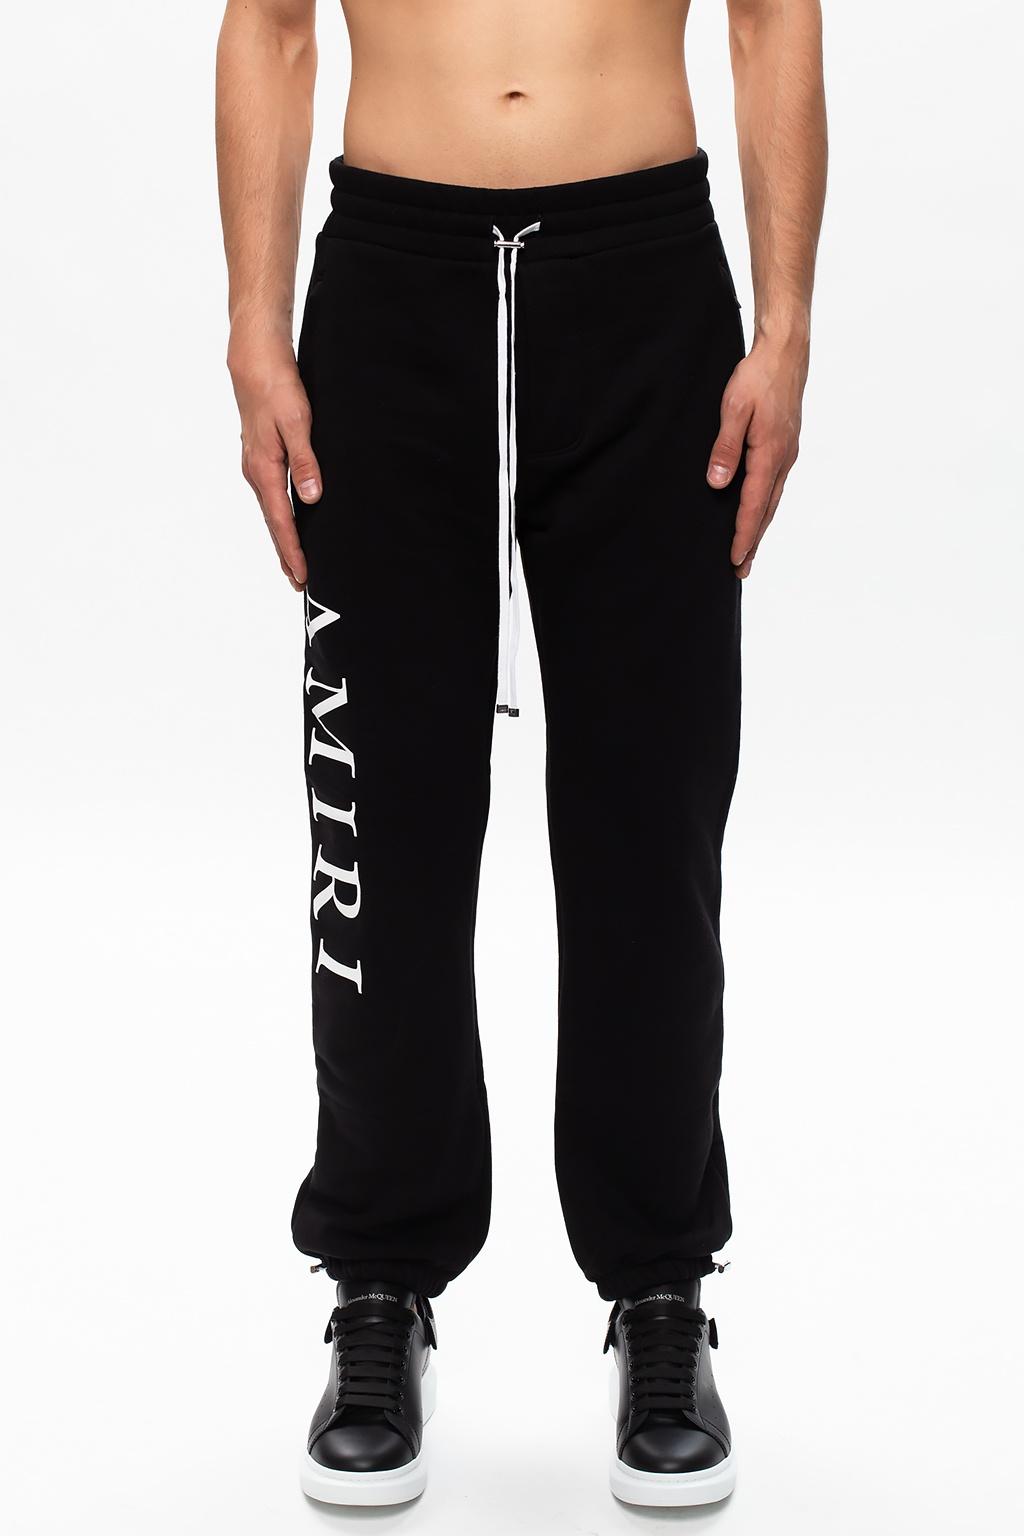 Amiri Cotton Sweatpants With Logo in Black for Men - Lyst